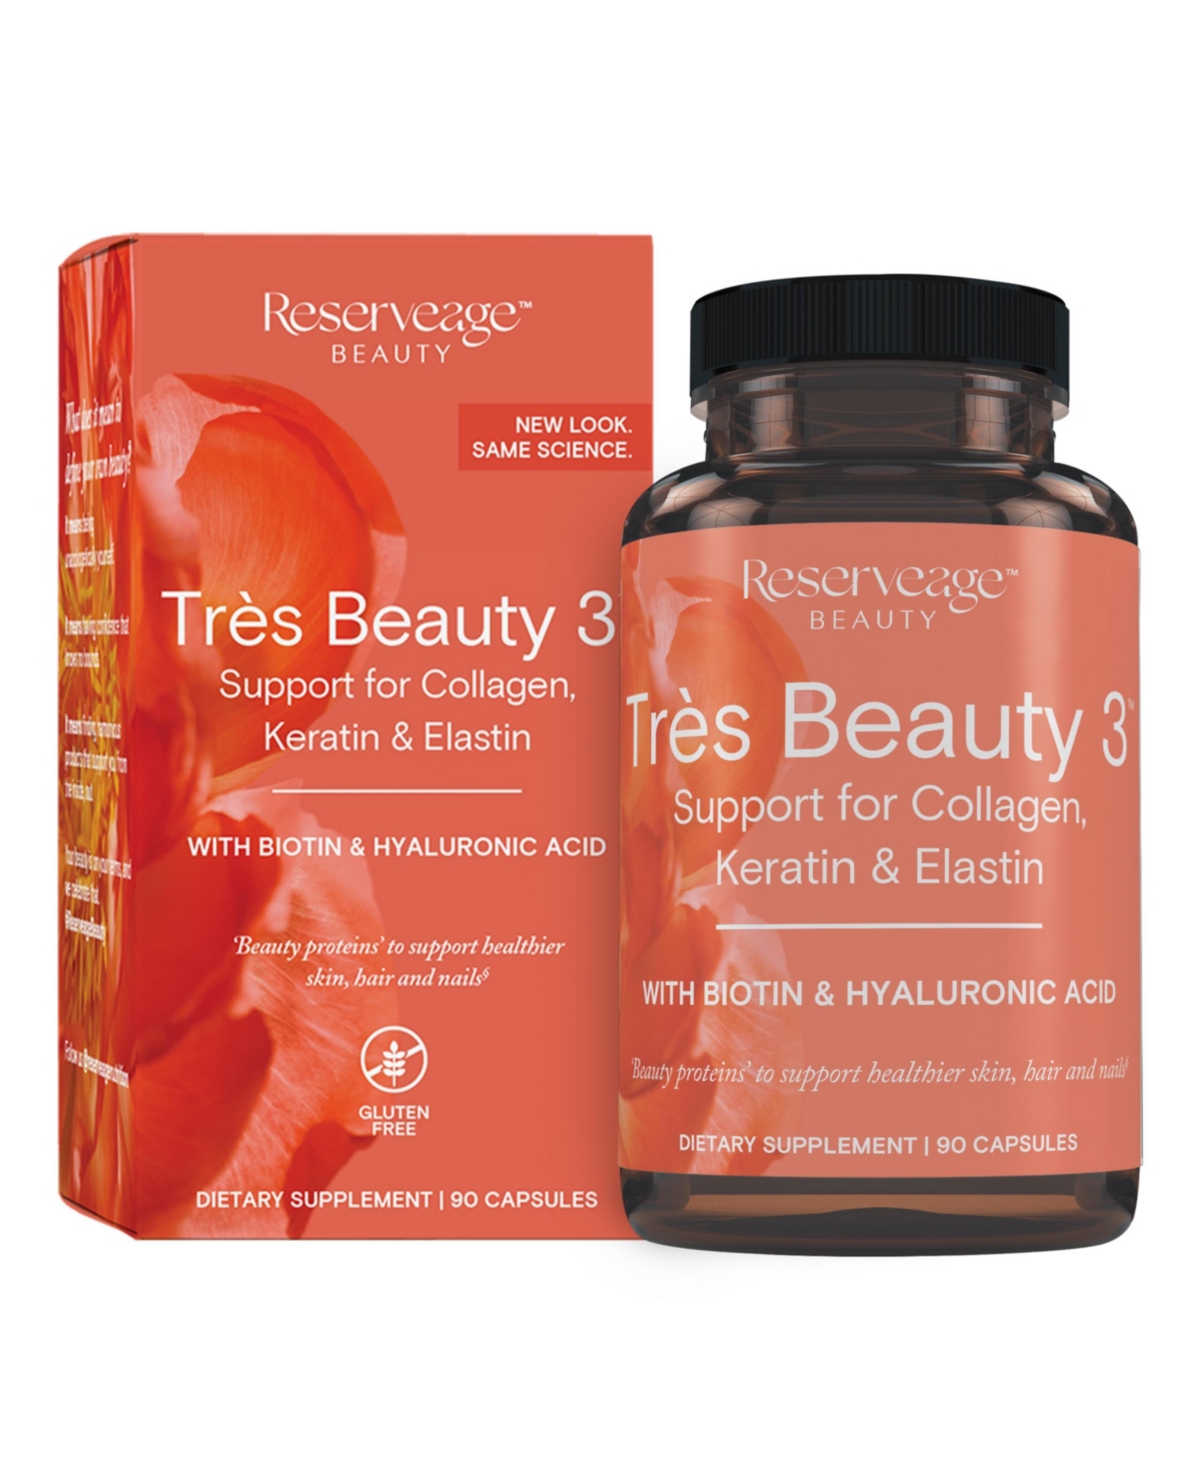 Tres Beauty 3, Beauty Supplement for Hair, Skin and Nails with Collagen, Keratin and Biotin, Gluten Free, 90 Capsules (30 Servings)